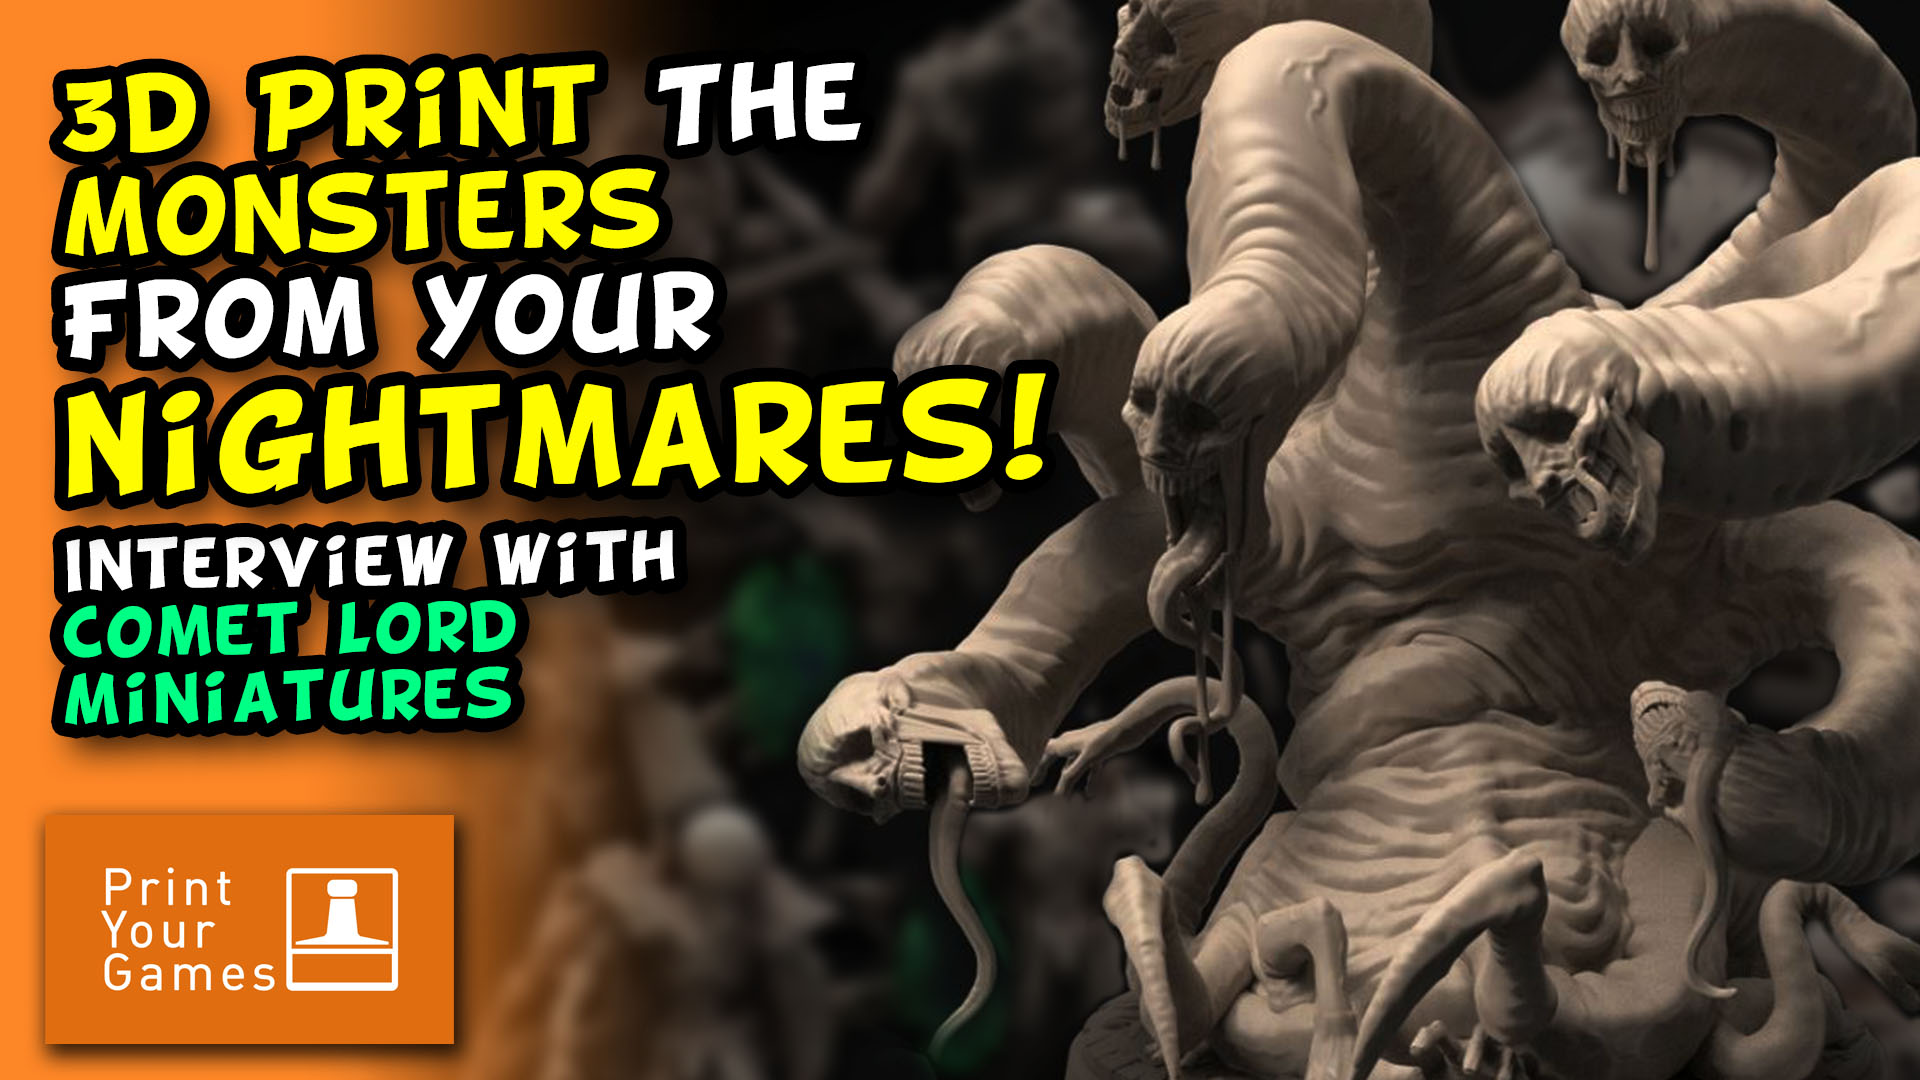 3d Print the Monsters from your Nightmares! Interview with Comet Lord Miniatures